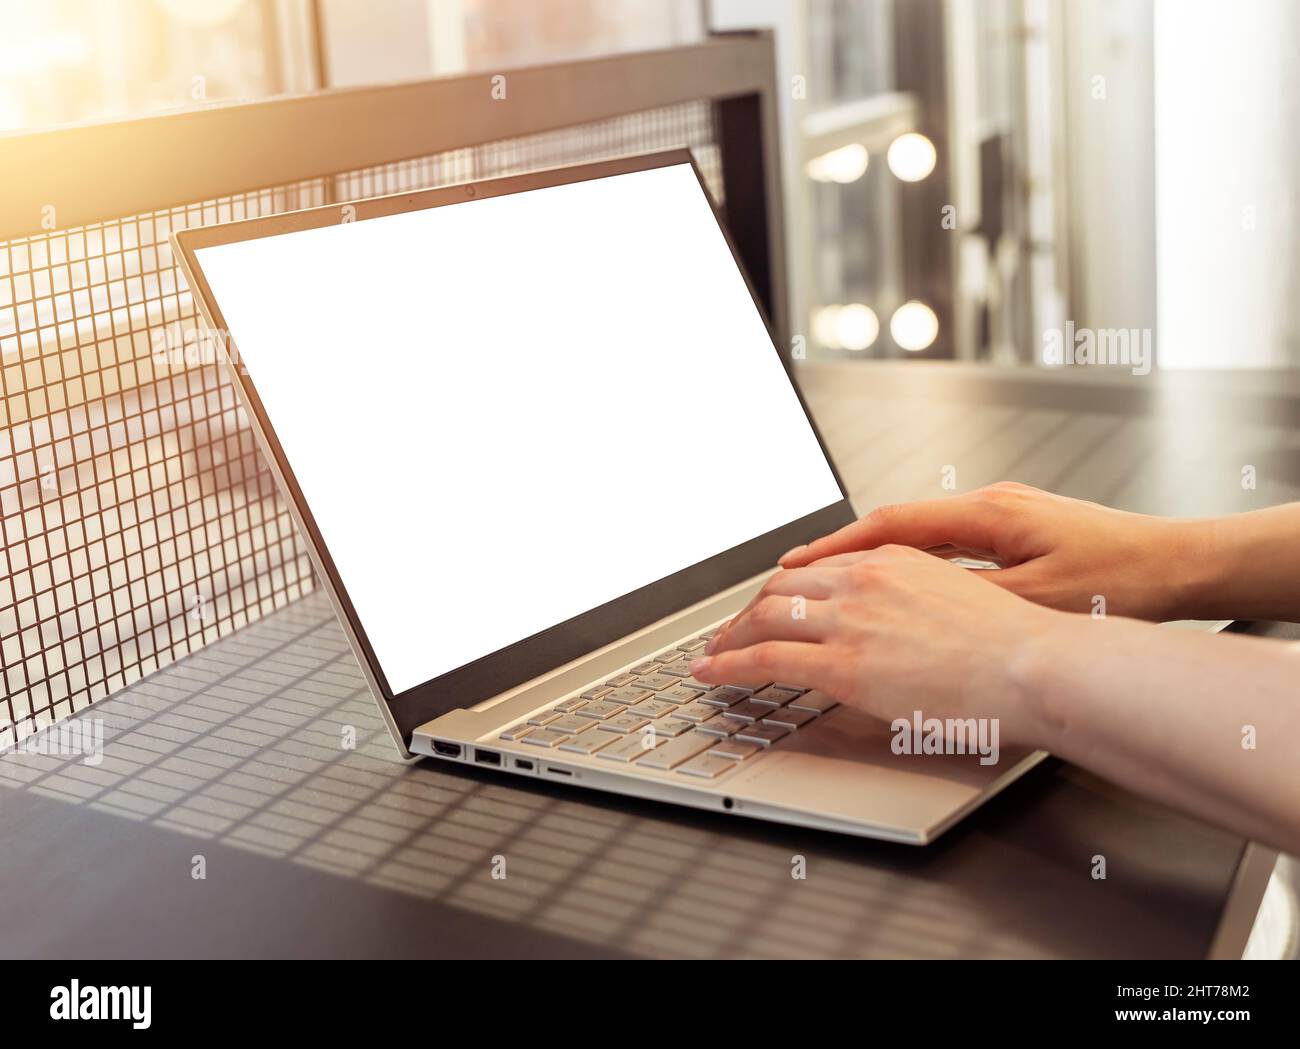 Woman hands closeup typing on laptop mockup. Hands over computer keyboard. Student or worker sitting at table and typing email, searching information on Internet, preparing presentation or research. High quality photo Stock Photo